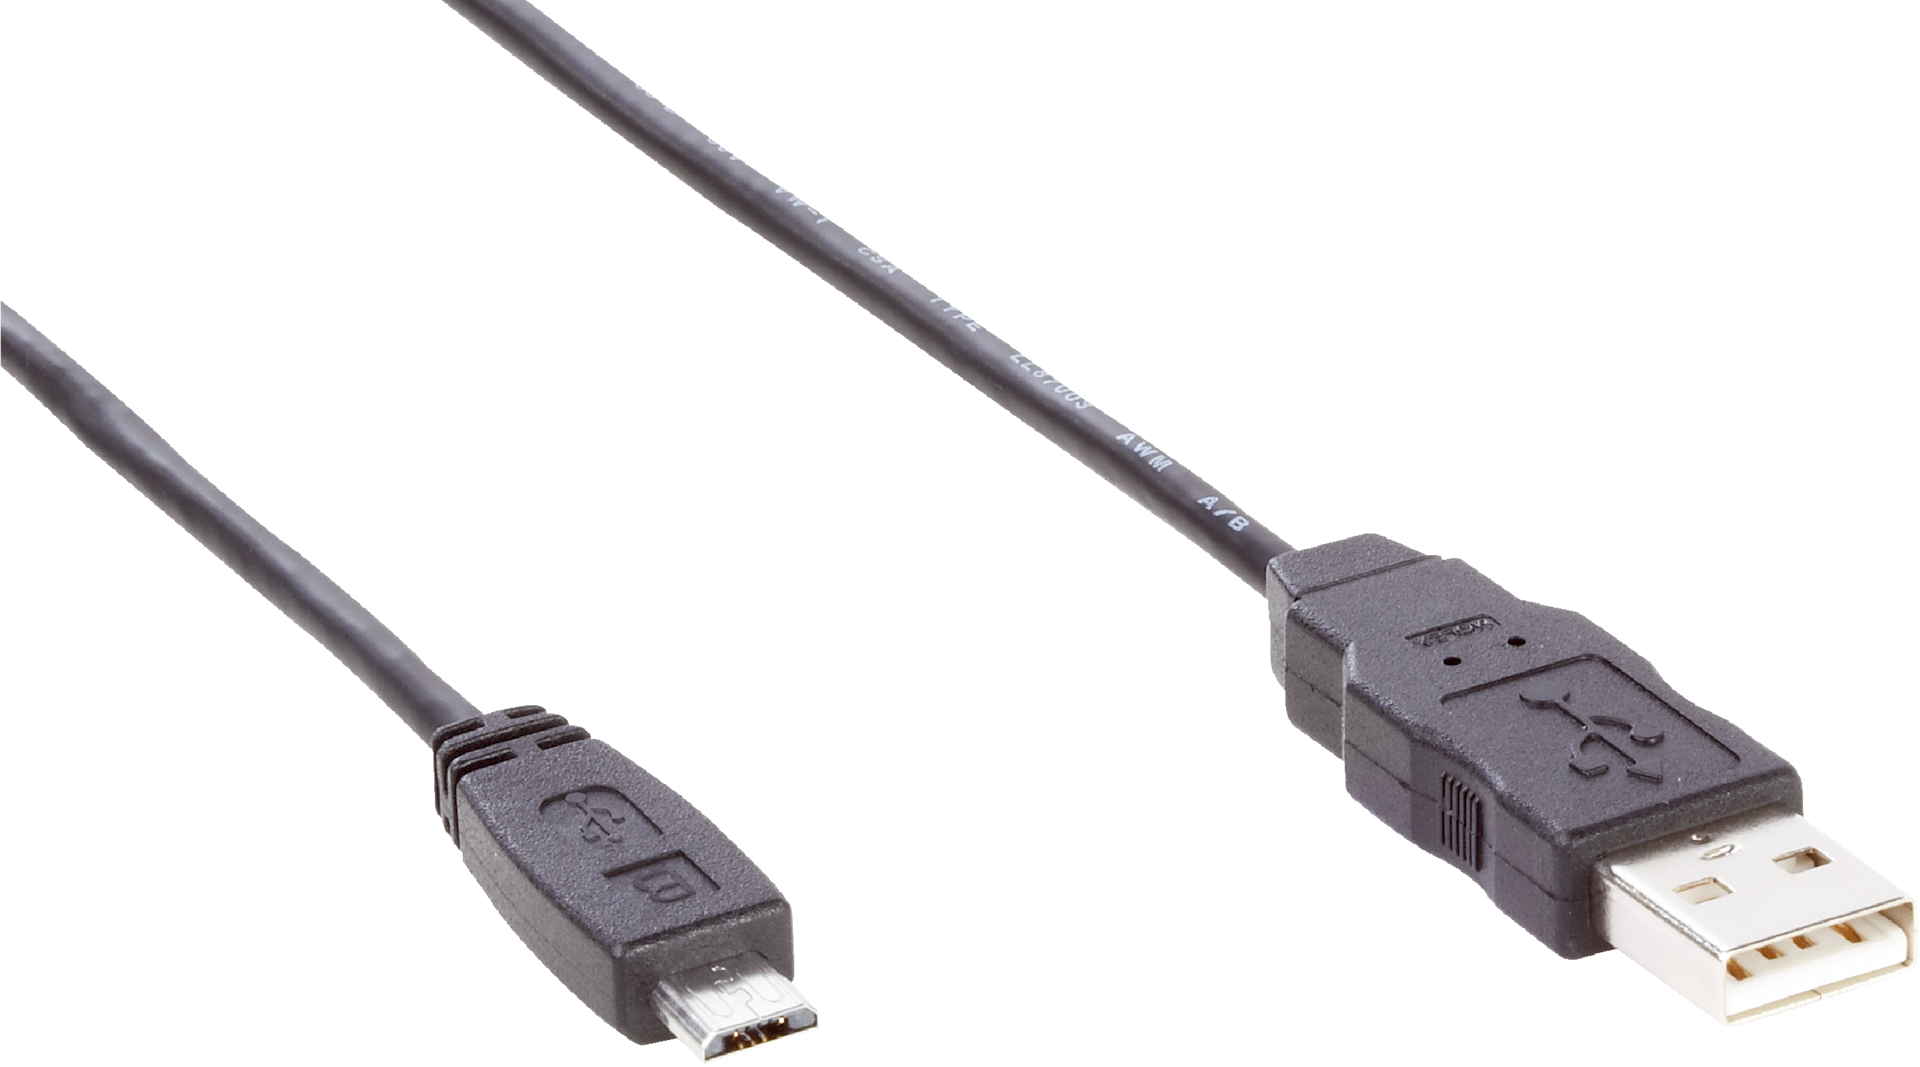 USB cable - Plug connectors and cables